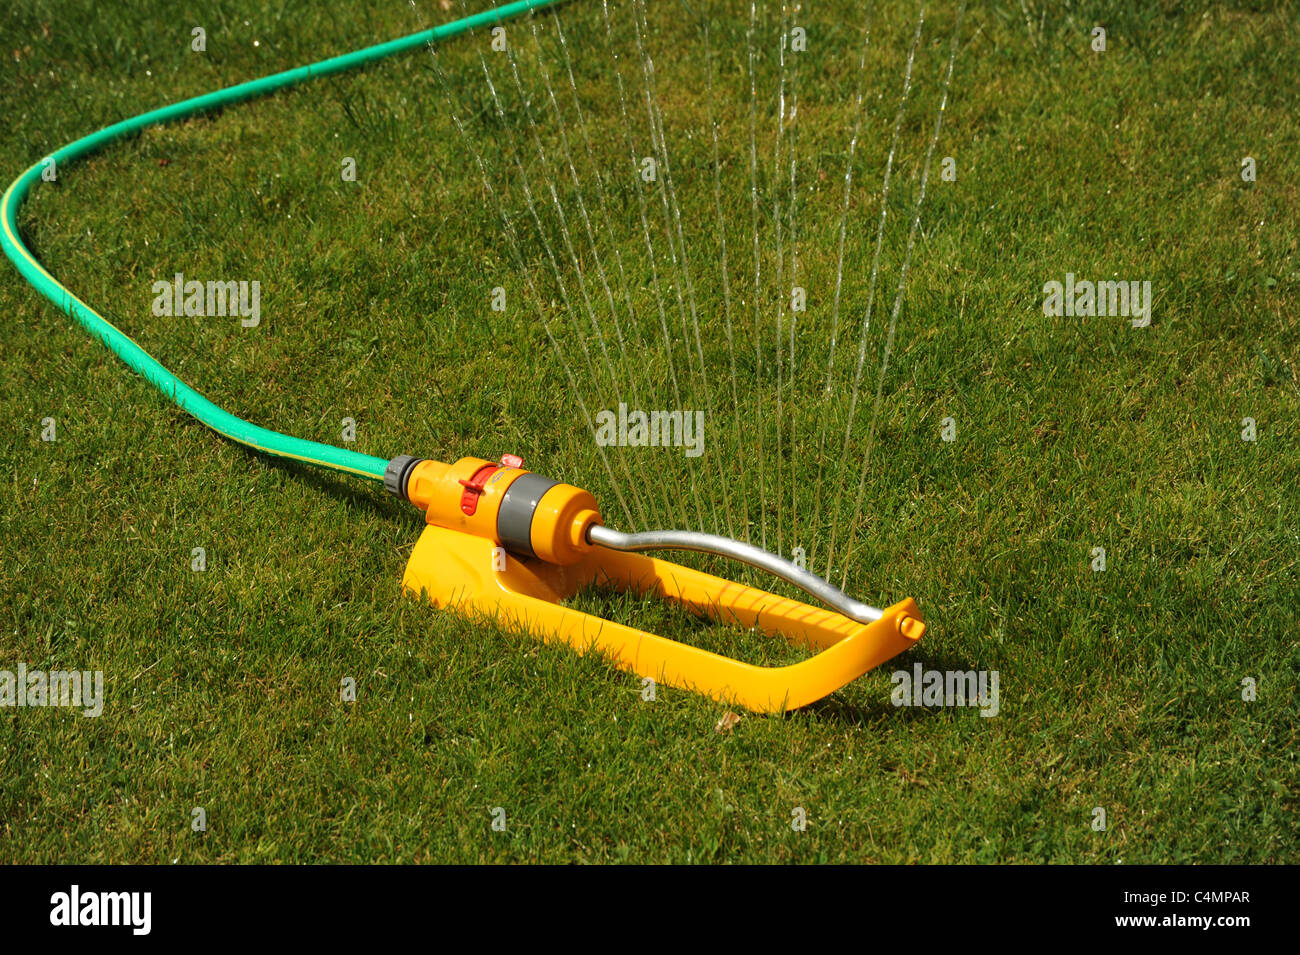 Water sprinkler on the grass watering lawn Stock Photo